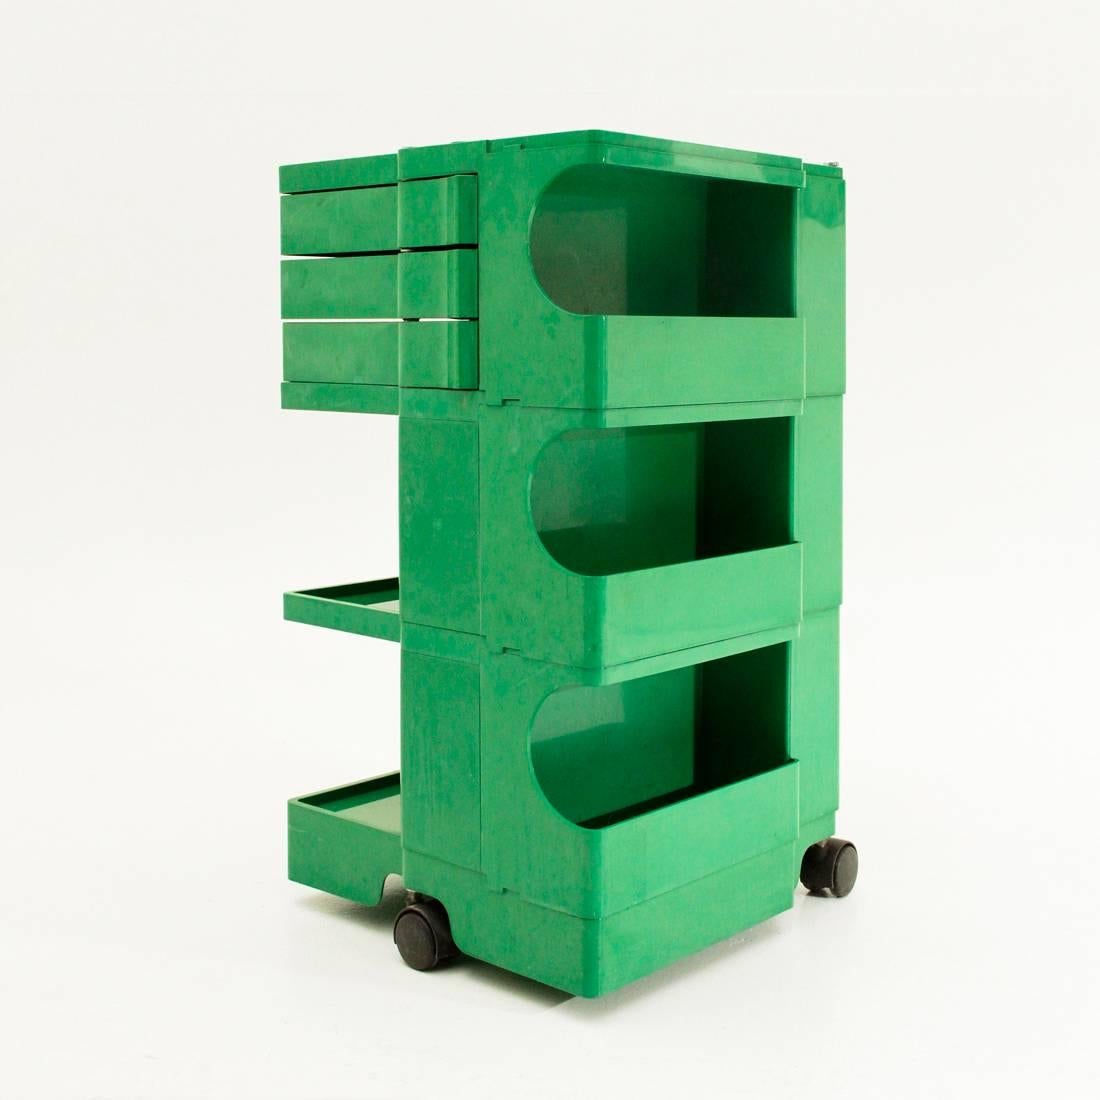 Cart designed in the 1970s by Joe Colombo and produced by Bieffeplast.
Green Abs structure with sliding shelves and wheels.
Good condition.

Dimensions: Width 41 cm, depth 43 cm, height 74 cm.
 